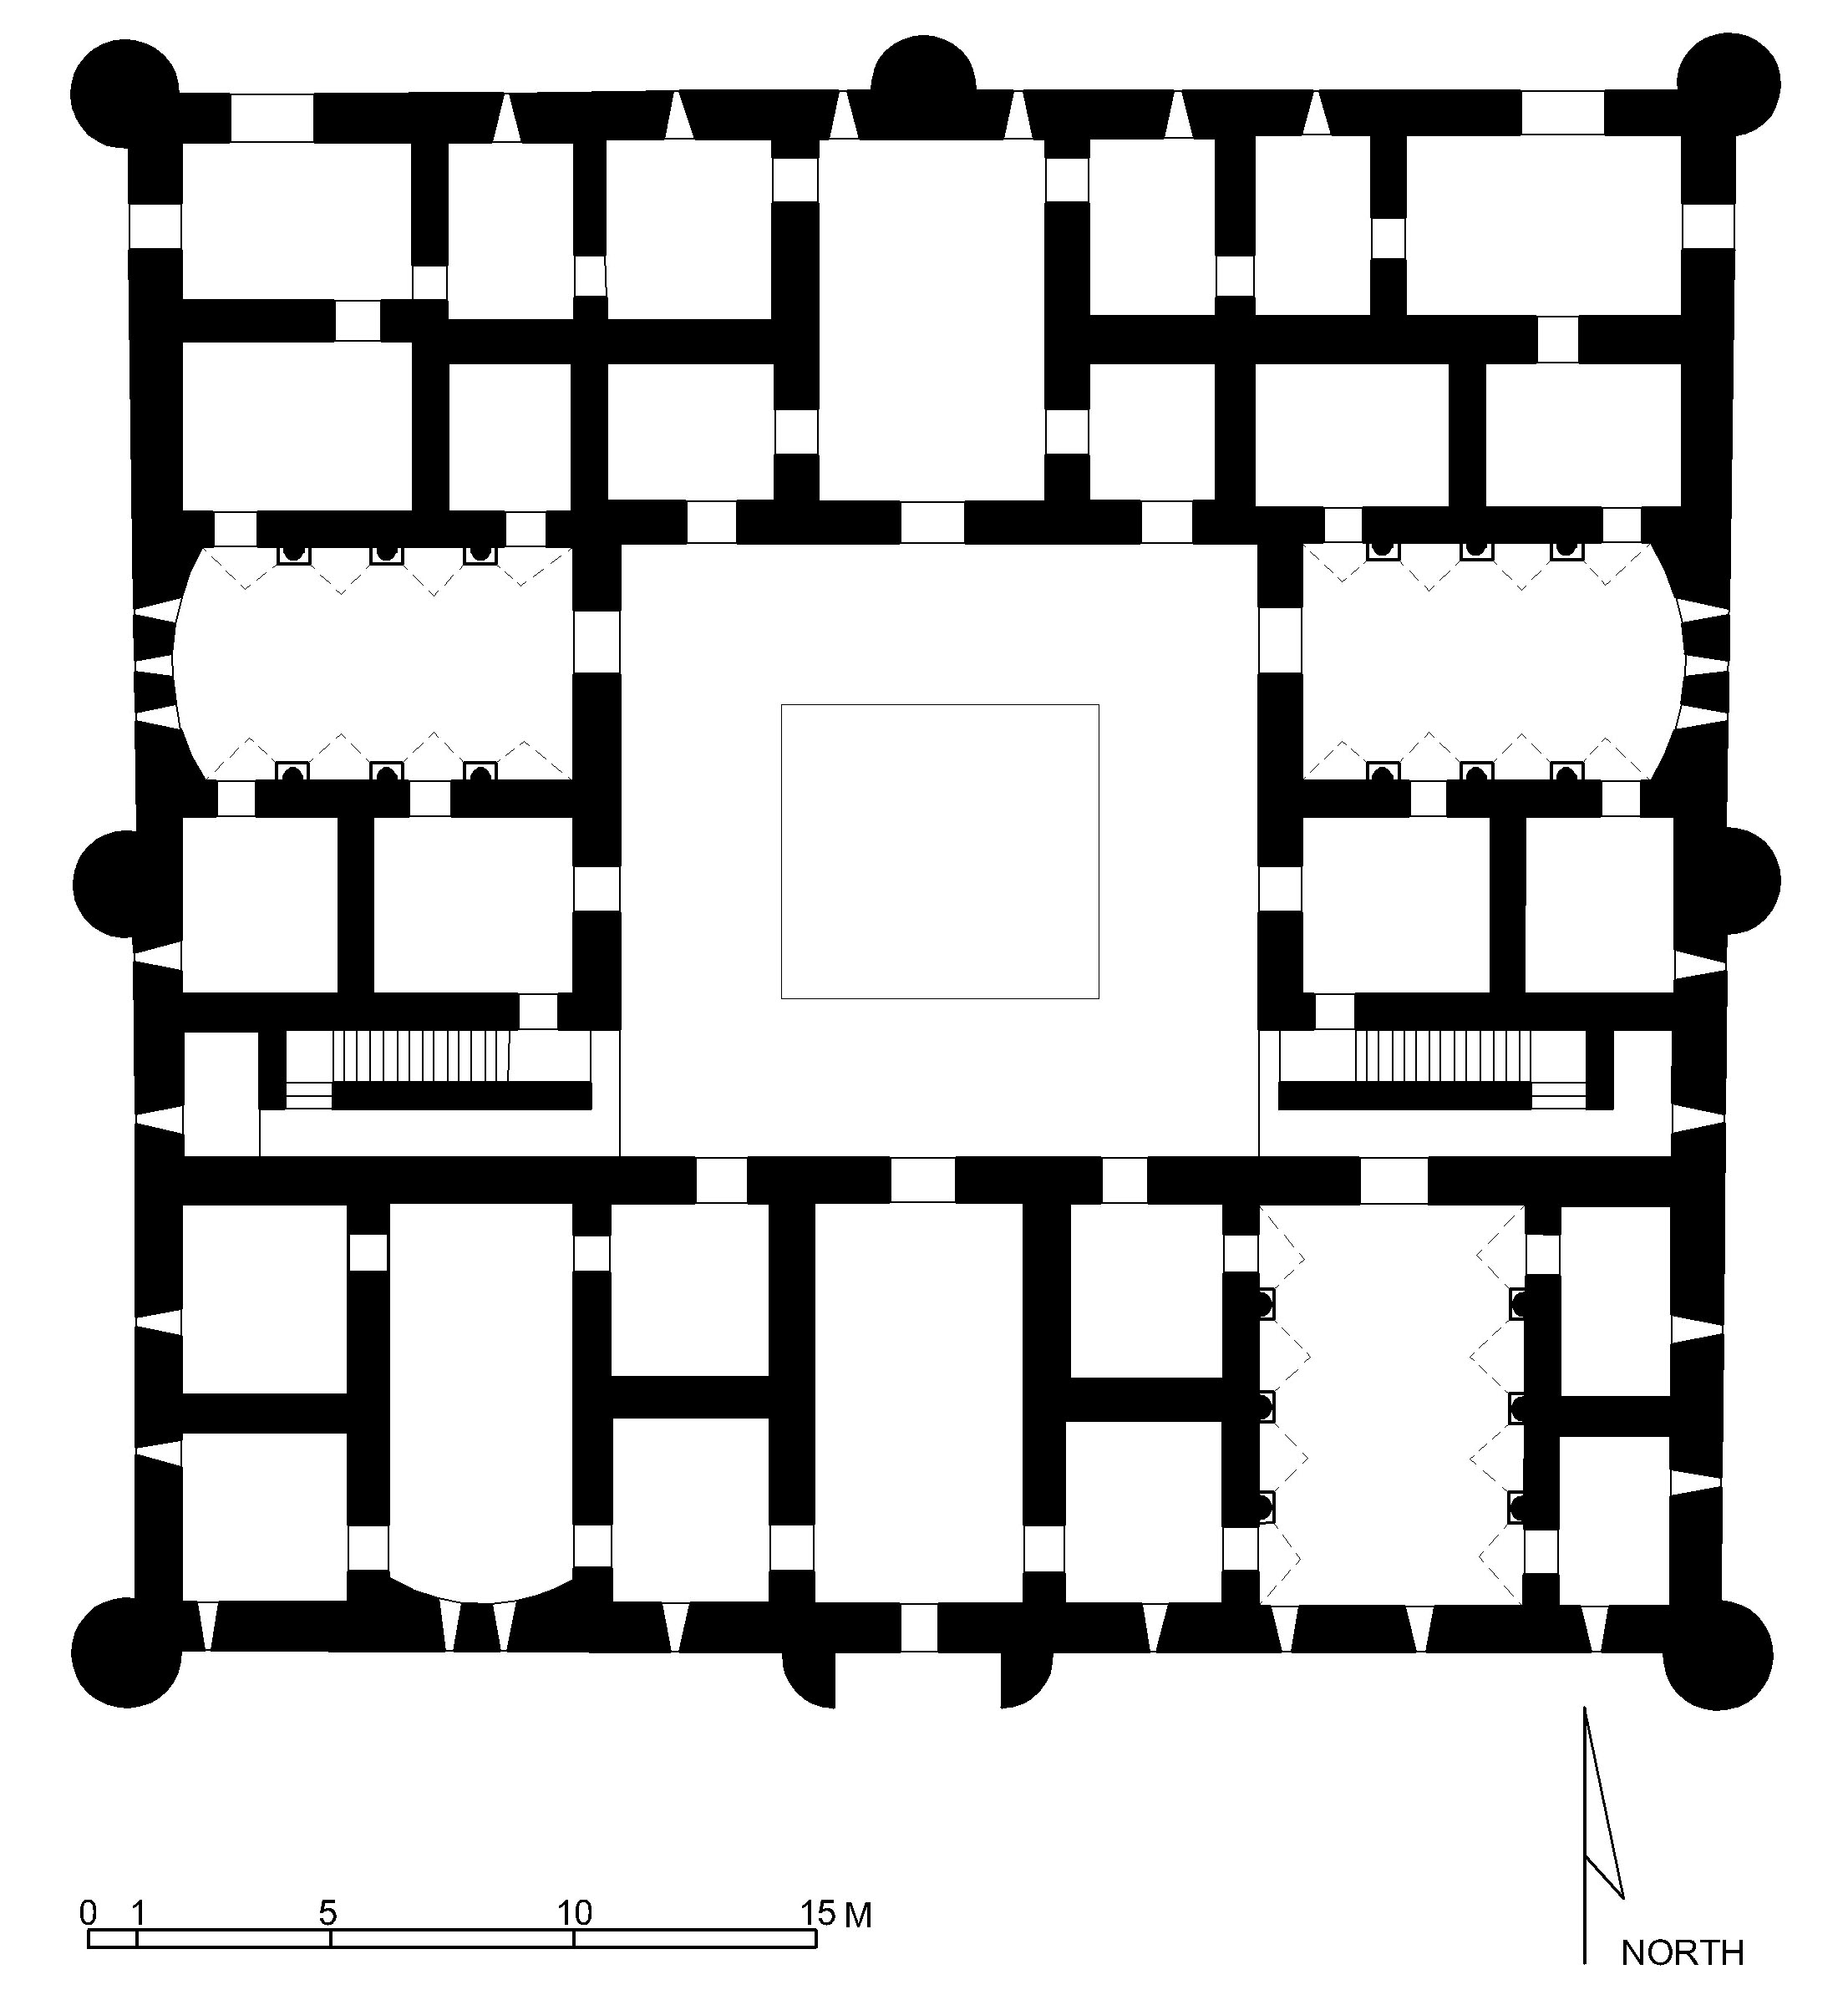 Qasr al-Kharana - Reconstituted plan of the upper floor in AutoCAD 2000 format. Click the download button to download a zipped file containing the .dwg file. 